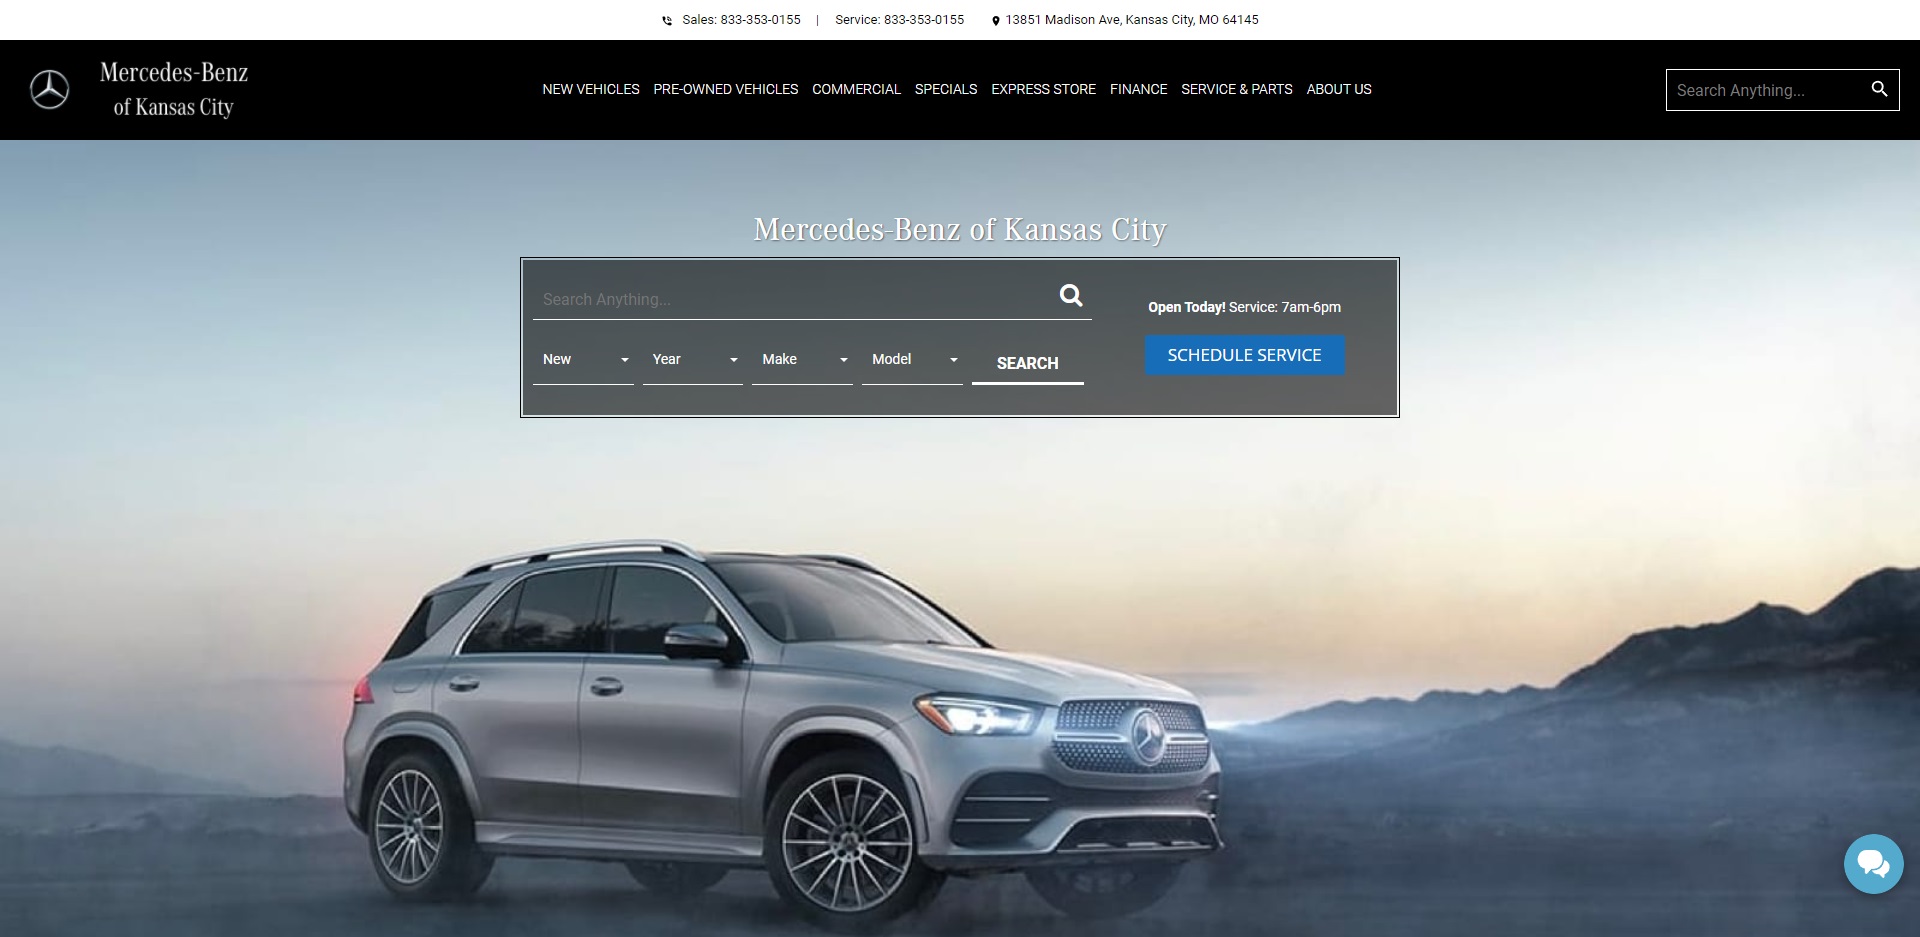 The Best Mercedes Dealers in St. Louis, MO